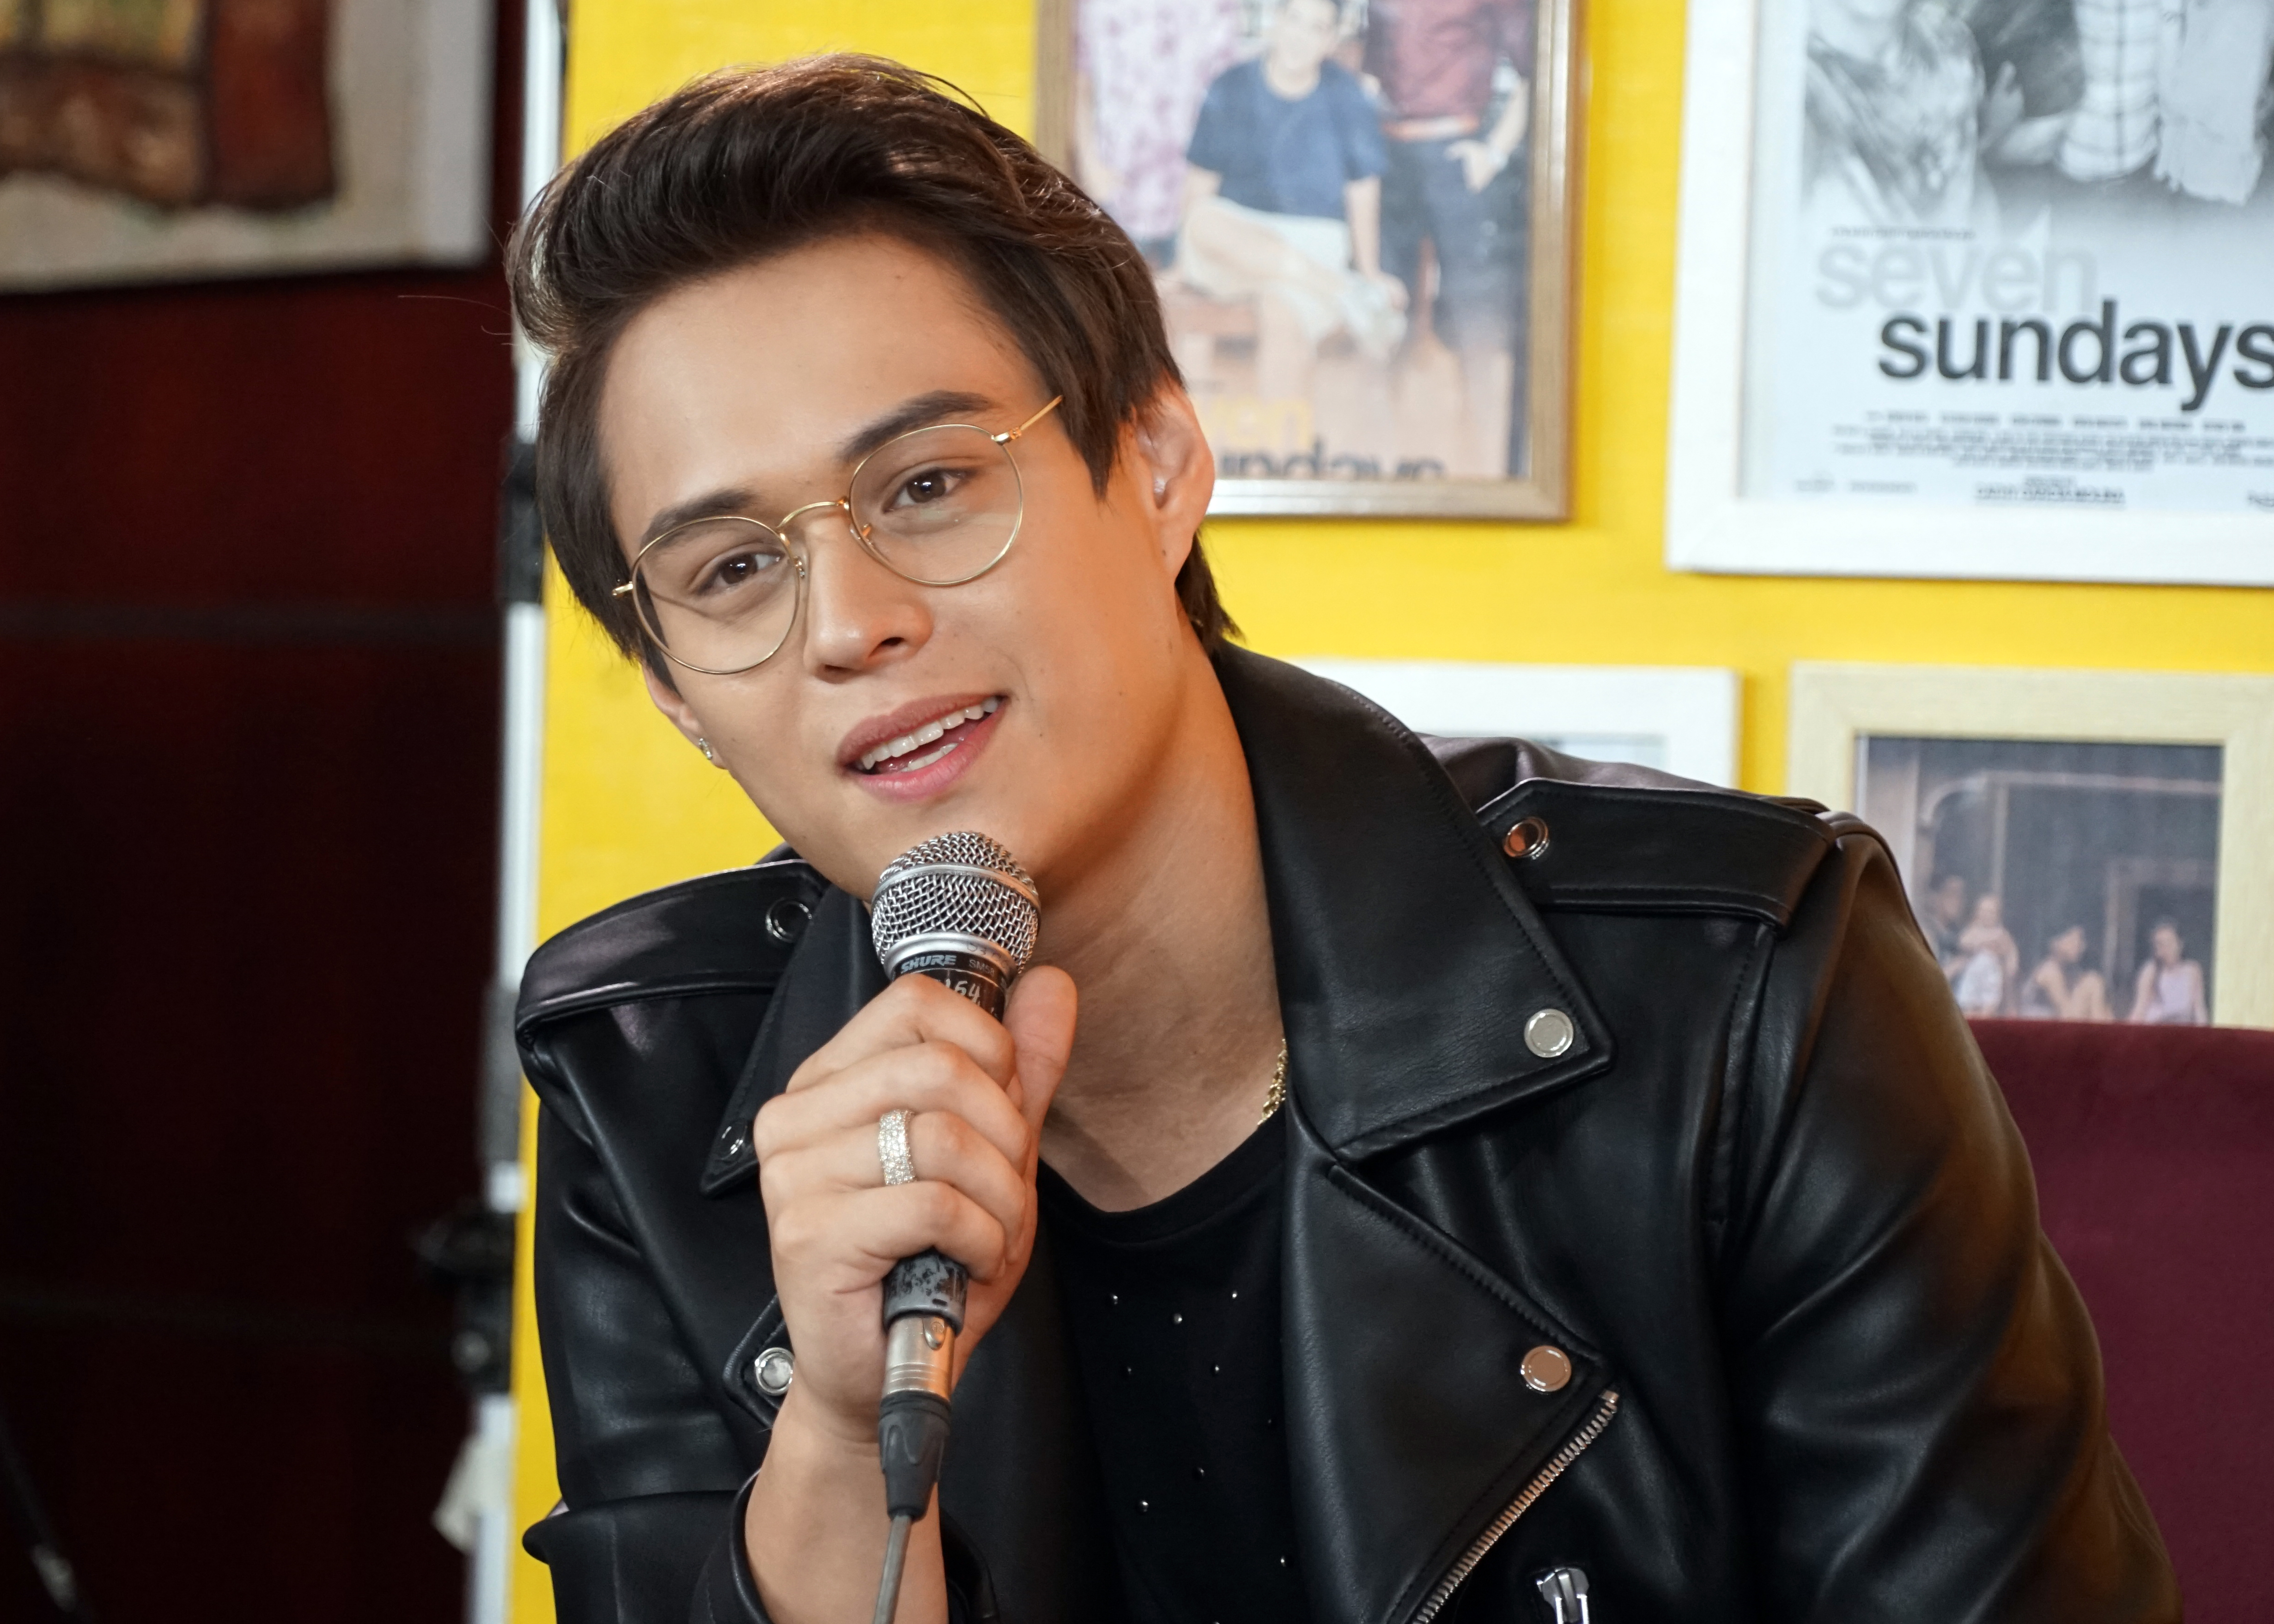 Enrique Gil says he just cried while doing the eulogy scene in the movie. 